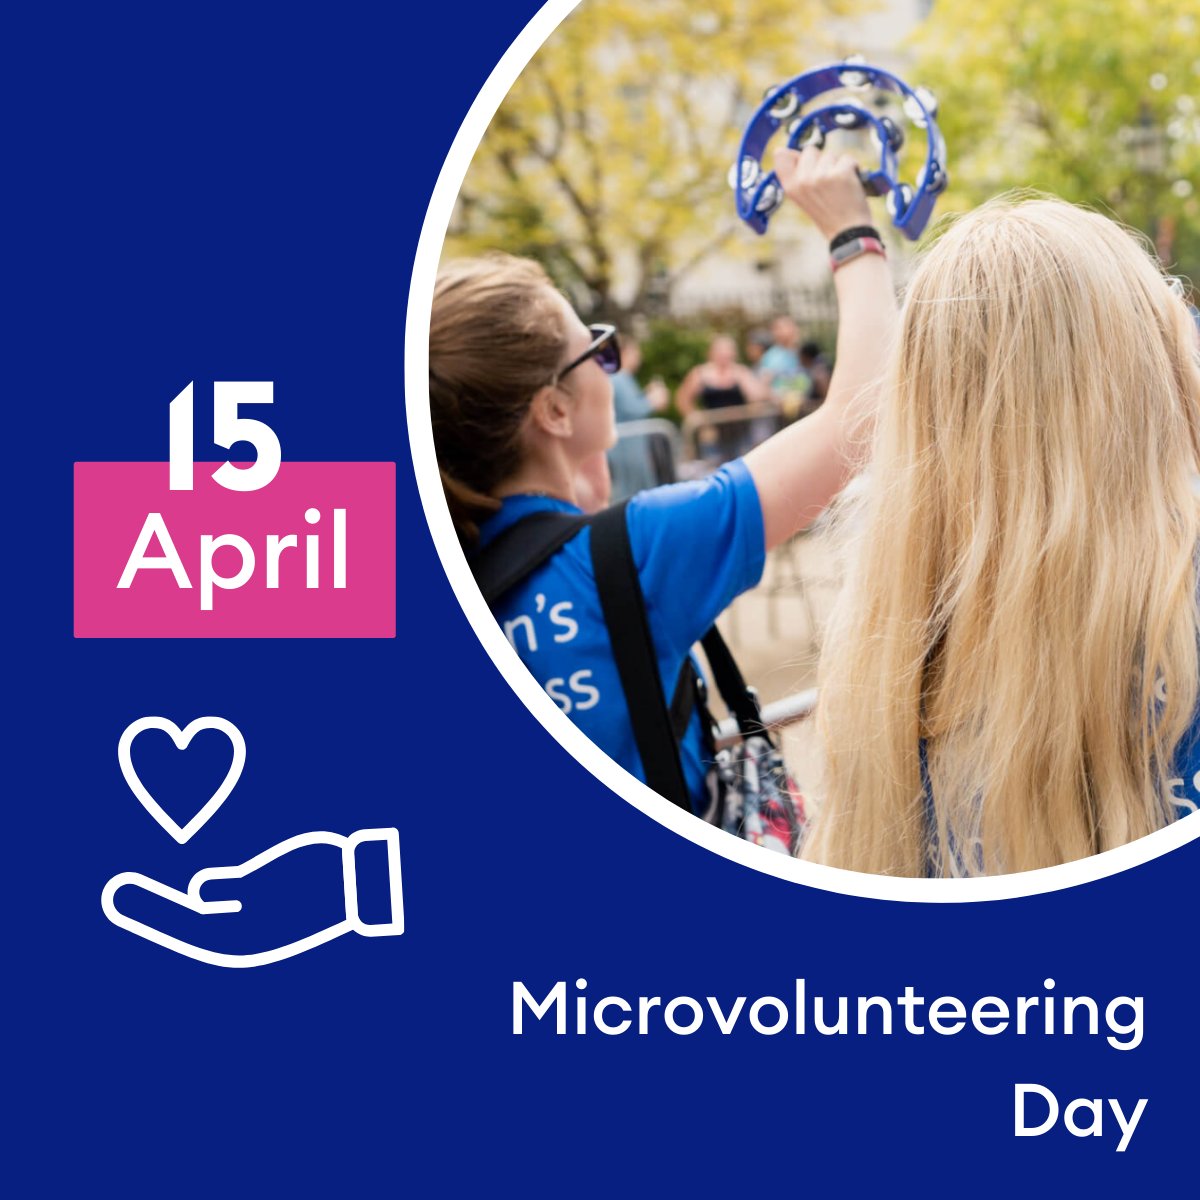 Its microvolunteering day! We know how busy it can get day to day, so we've come up with ways big and small you can volunteer your time here🔗 ow.ly/2vzA50RfY7e #Microvolunteering #Volunteering #Charity